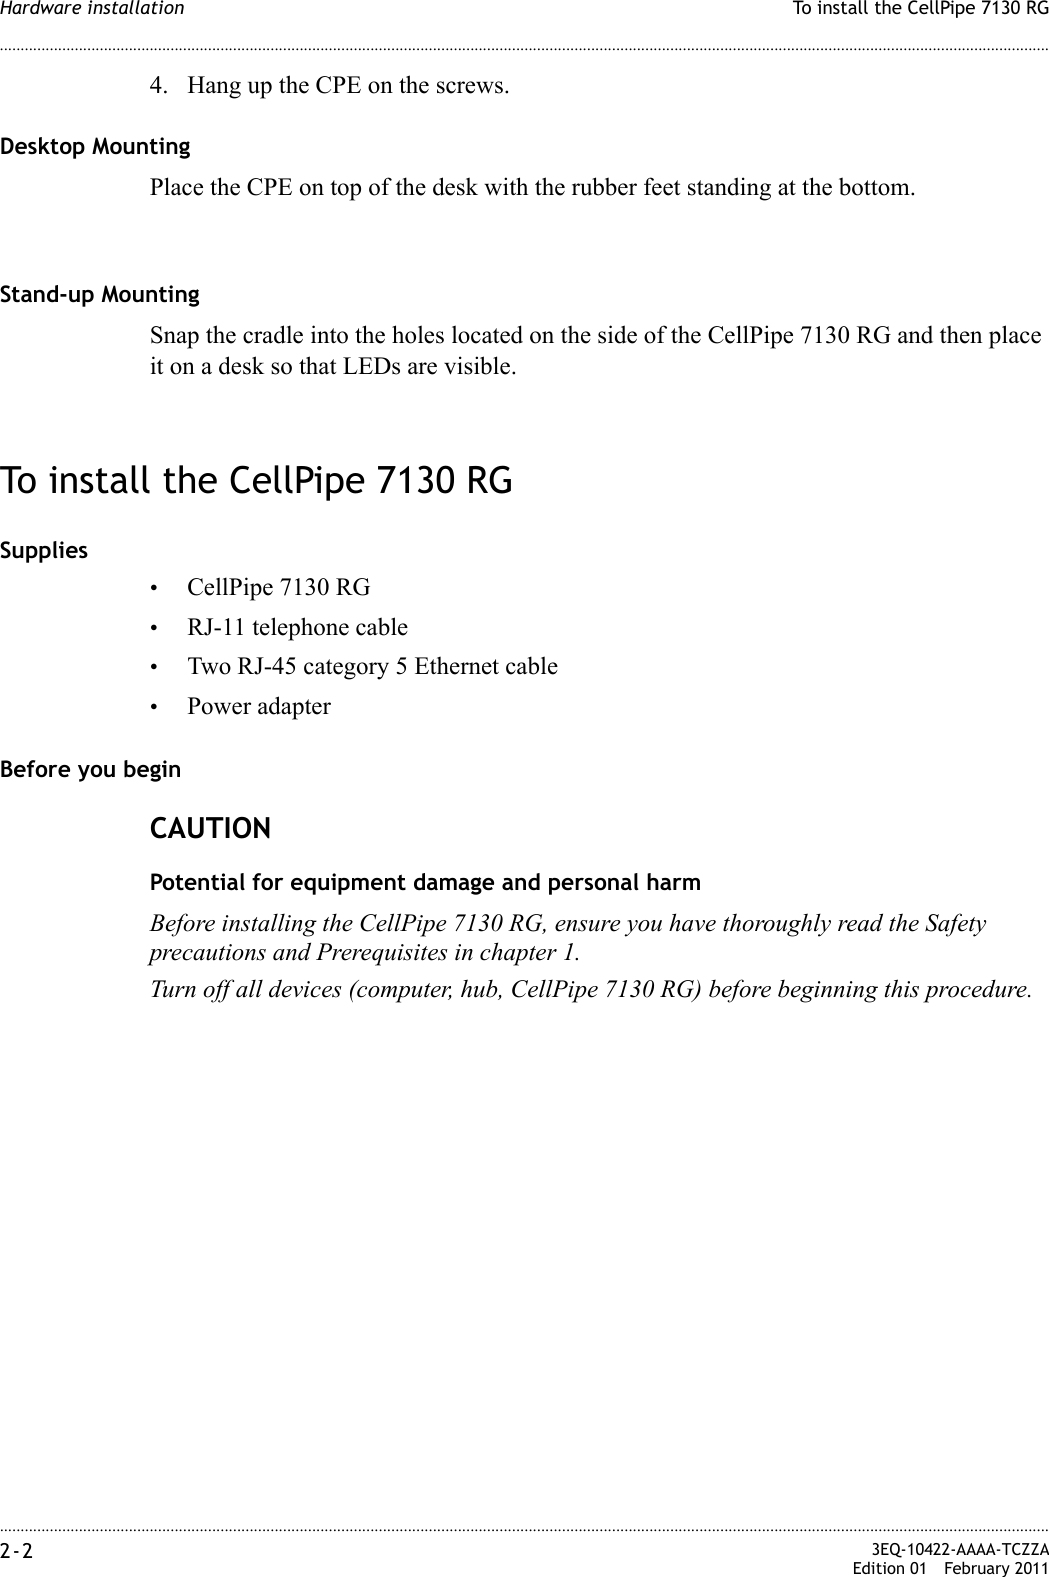 ............................................................................................................................................................................................................................................................To install the CellPipe 7130 RGHardware installation2-2  3EQ-10422-AAAA-TCZZAEdition 01 February 2011............................................................................................................................................................................................................................................................4. Hang up the CPE on the screws.Desktop MountingPlace the CPE on top of the desk with the rubber feet standing at the bottom.Stand-up MountingSnap the cradle into the holes located on the side of the CellPipe 7130 RG and then place it on a desk so that LEDs are visible.To install the CellPipe 7130 RGSupplies•CellPipe 7130 RG•RJ-11 telephone cable•Two RJ-45 category 5 Ethernet cable•Power adapterBefore you beginCAUTIONPotential for equipment damage and personal harmBefore installing the CellPipe 7130 RG, ensure you have thoroughly read the Safety precautions and Prerequisites in chapter 1.Turn off all devices (computer, hub, CellPipe 7130 RG) before beginning this procedure.